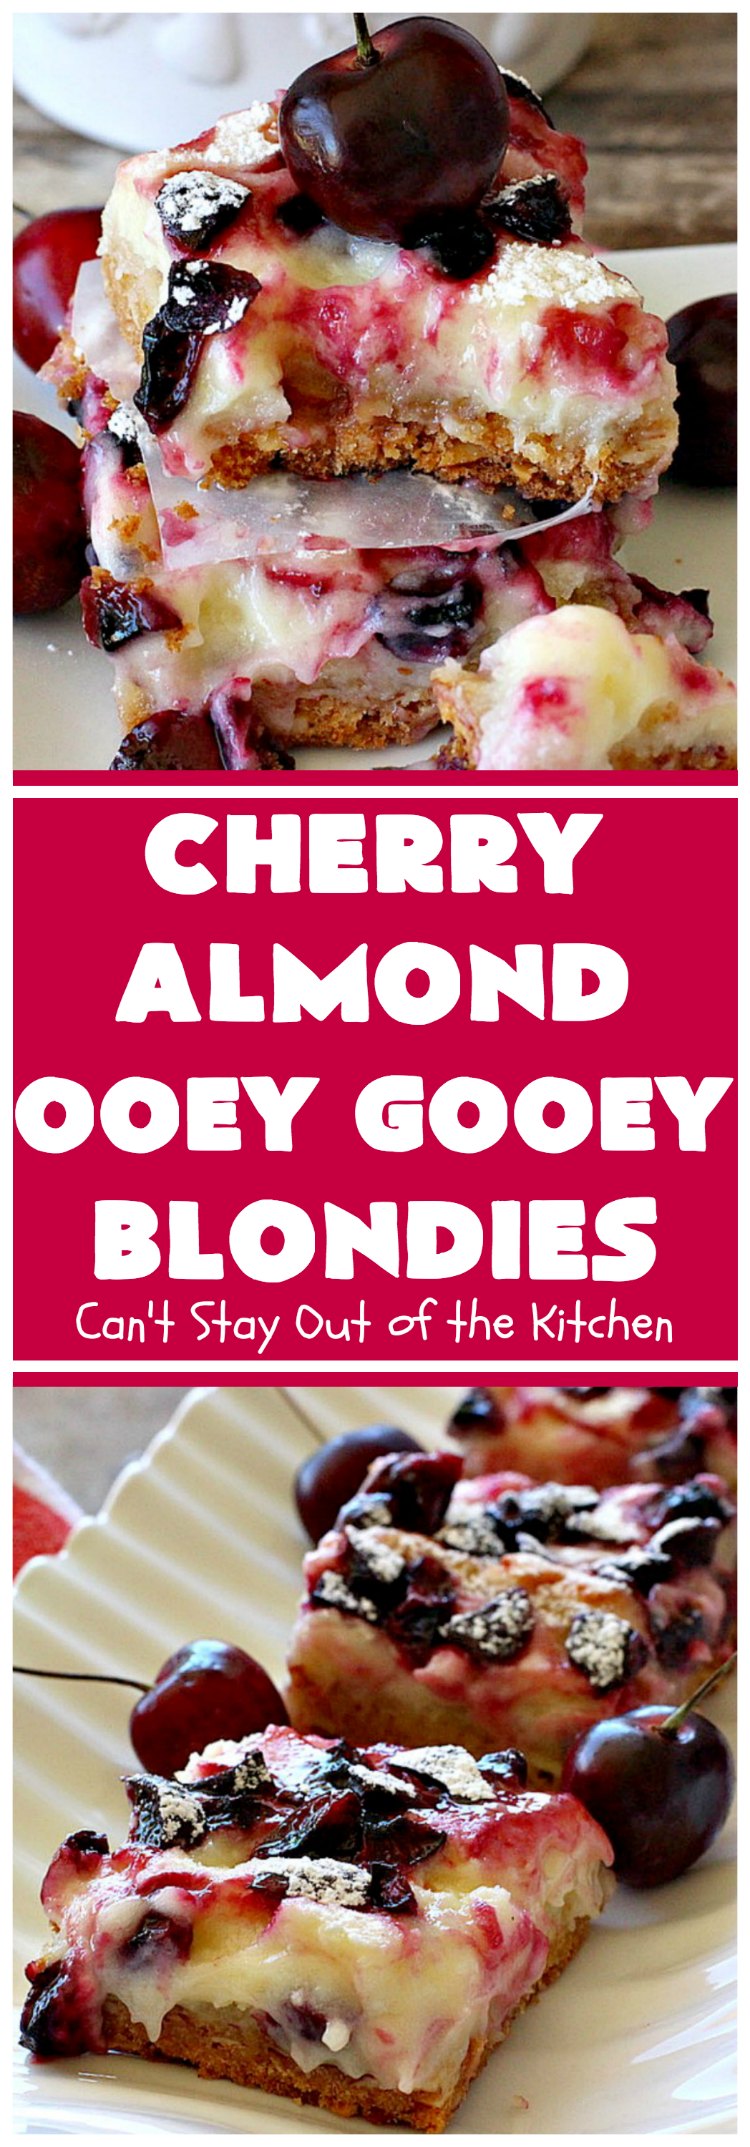 Cherry Almond Ooey Gooey Blondies | Can't Stay Out of the Kitchen